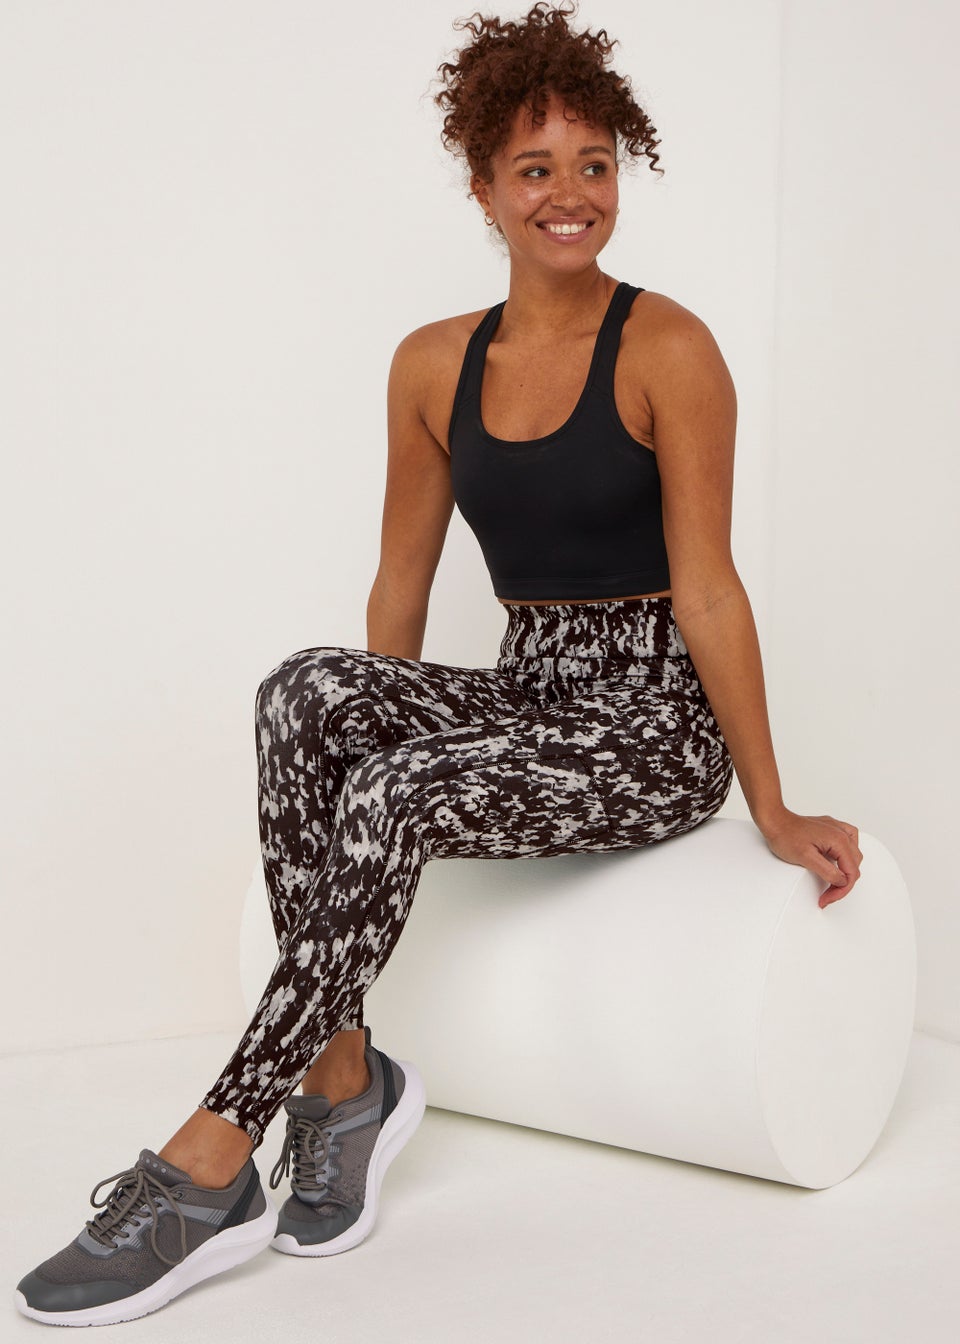 Get in shape with Matalan's stylish Souluxe gym wear range which includes  leggings, sports bras, gym bags and more - MyLondon